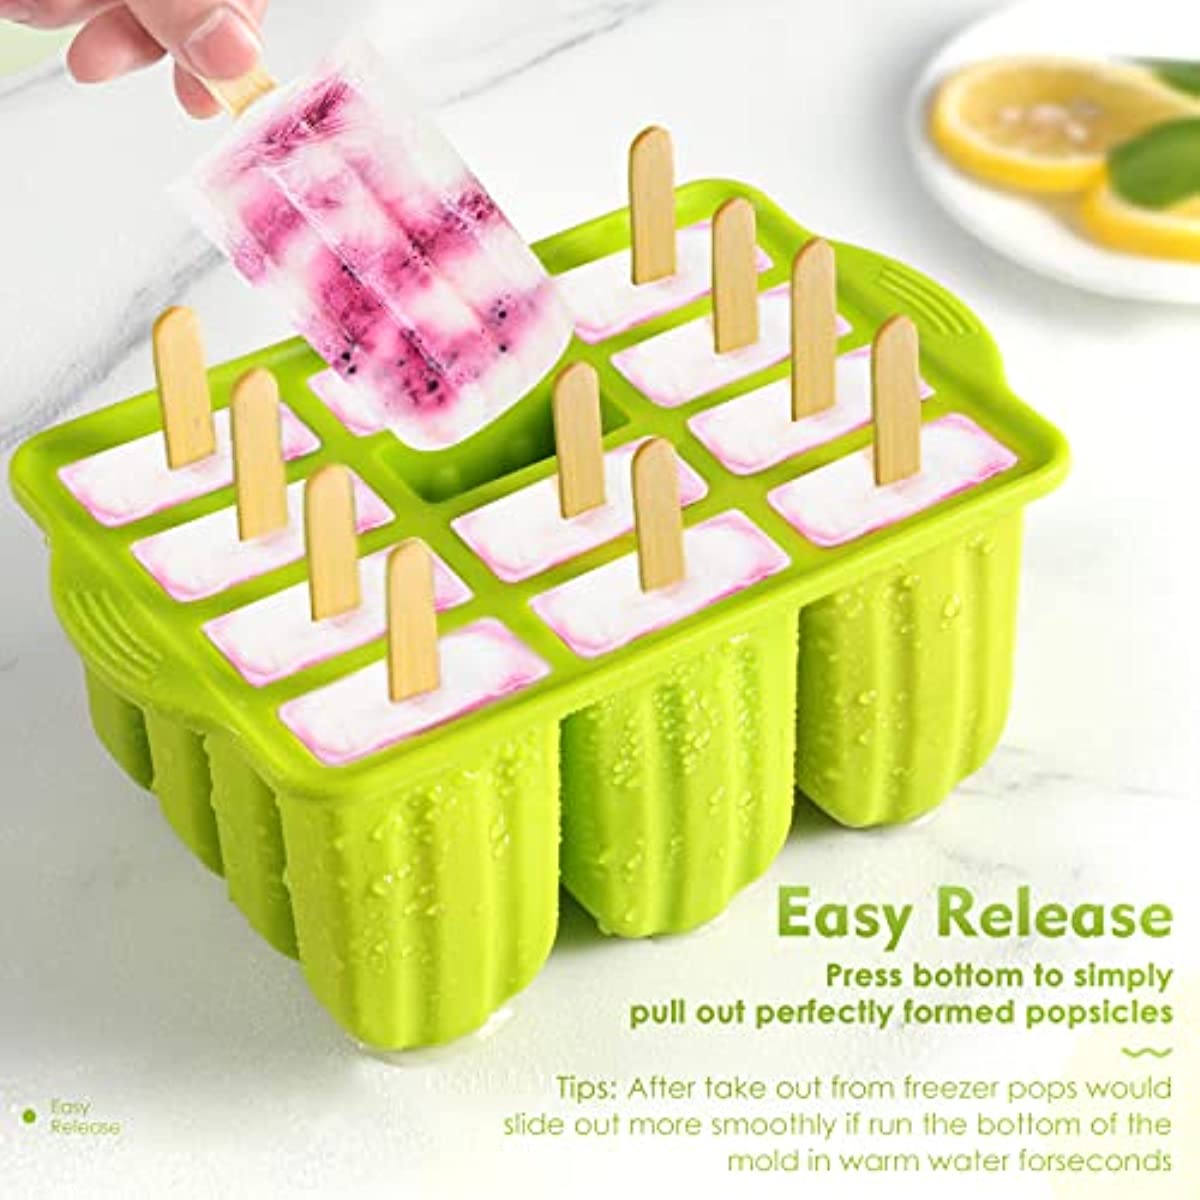 Popsicle Molds 6 Pieces Silicone Ice Pop Molds, BPA Free Popsicle